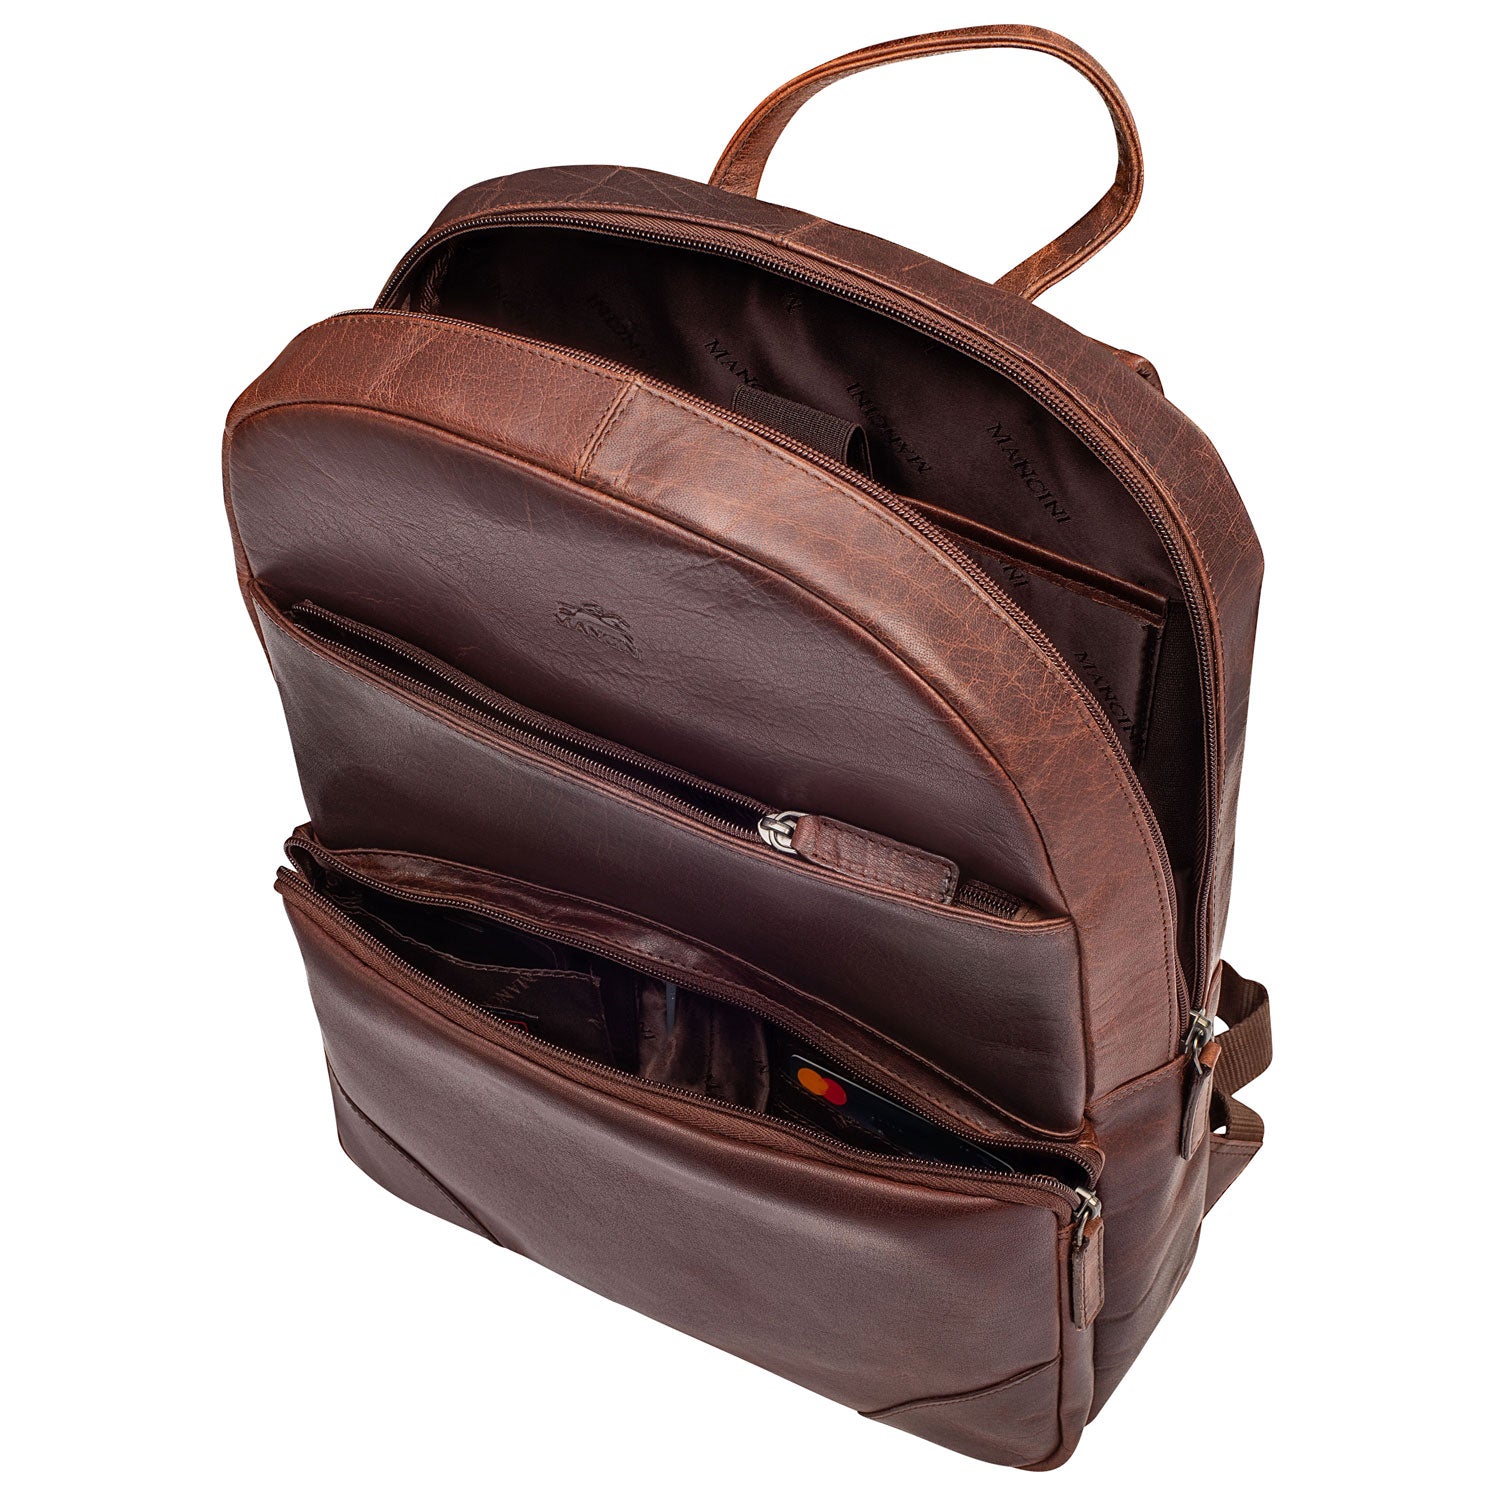 Slim Backpack for 14" Laptop, 12" x 4" x 16.25", Brown